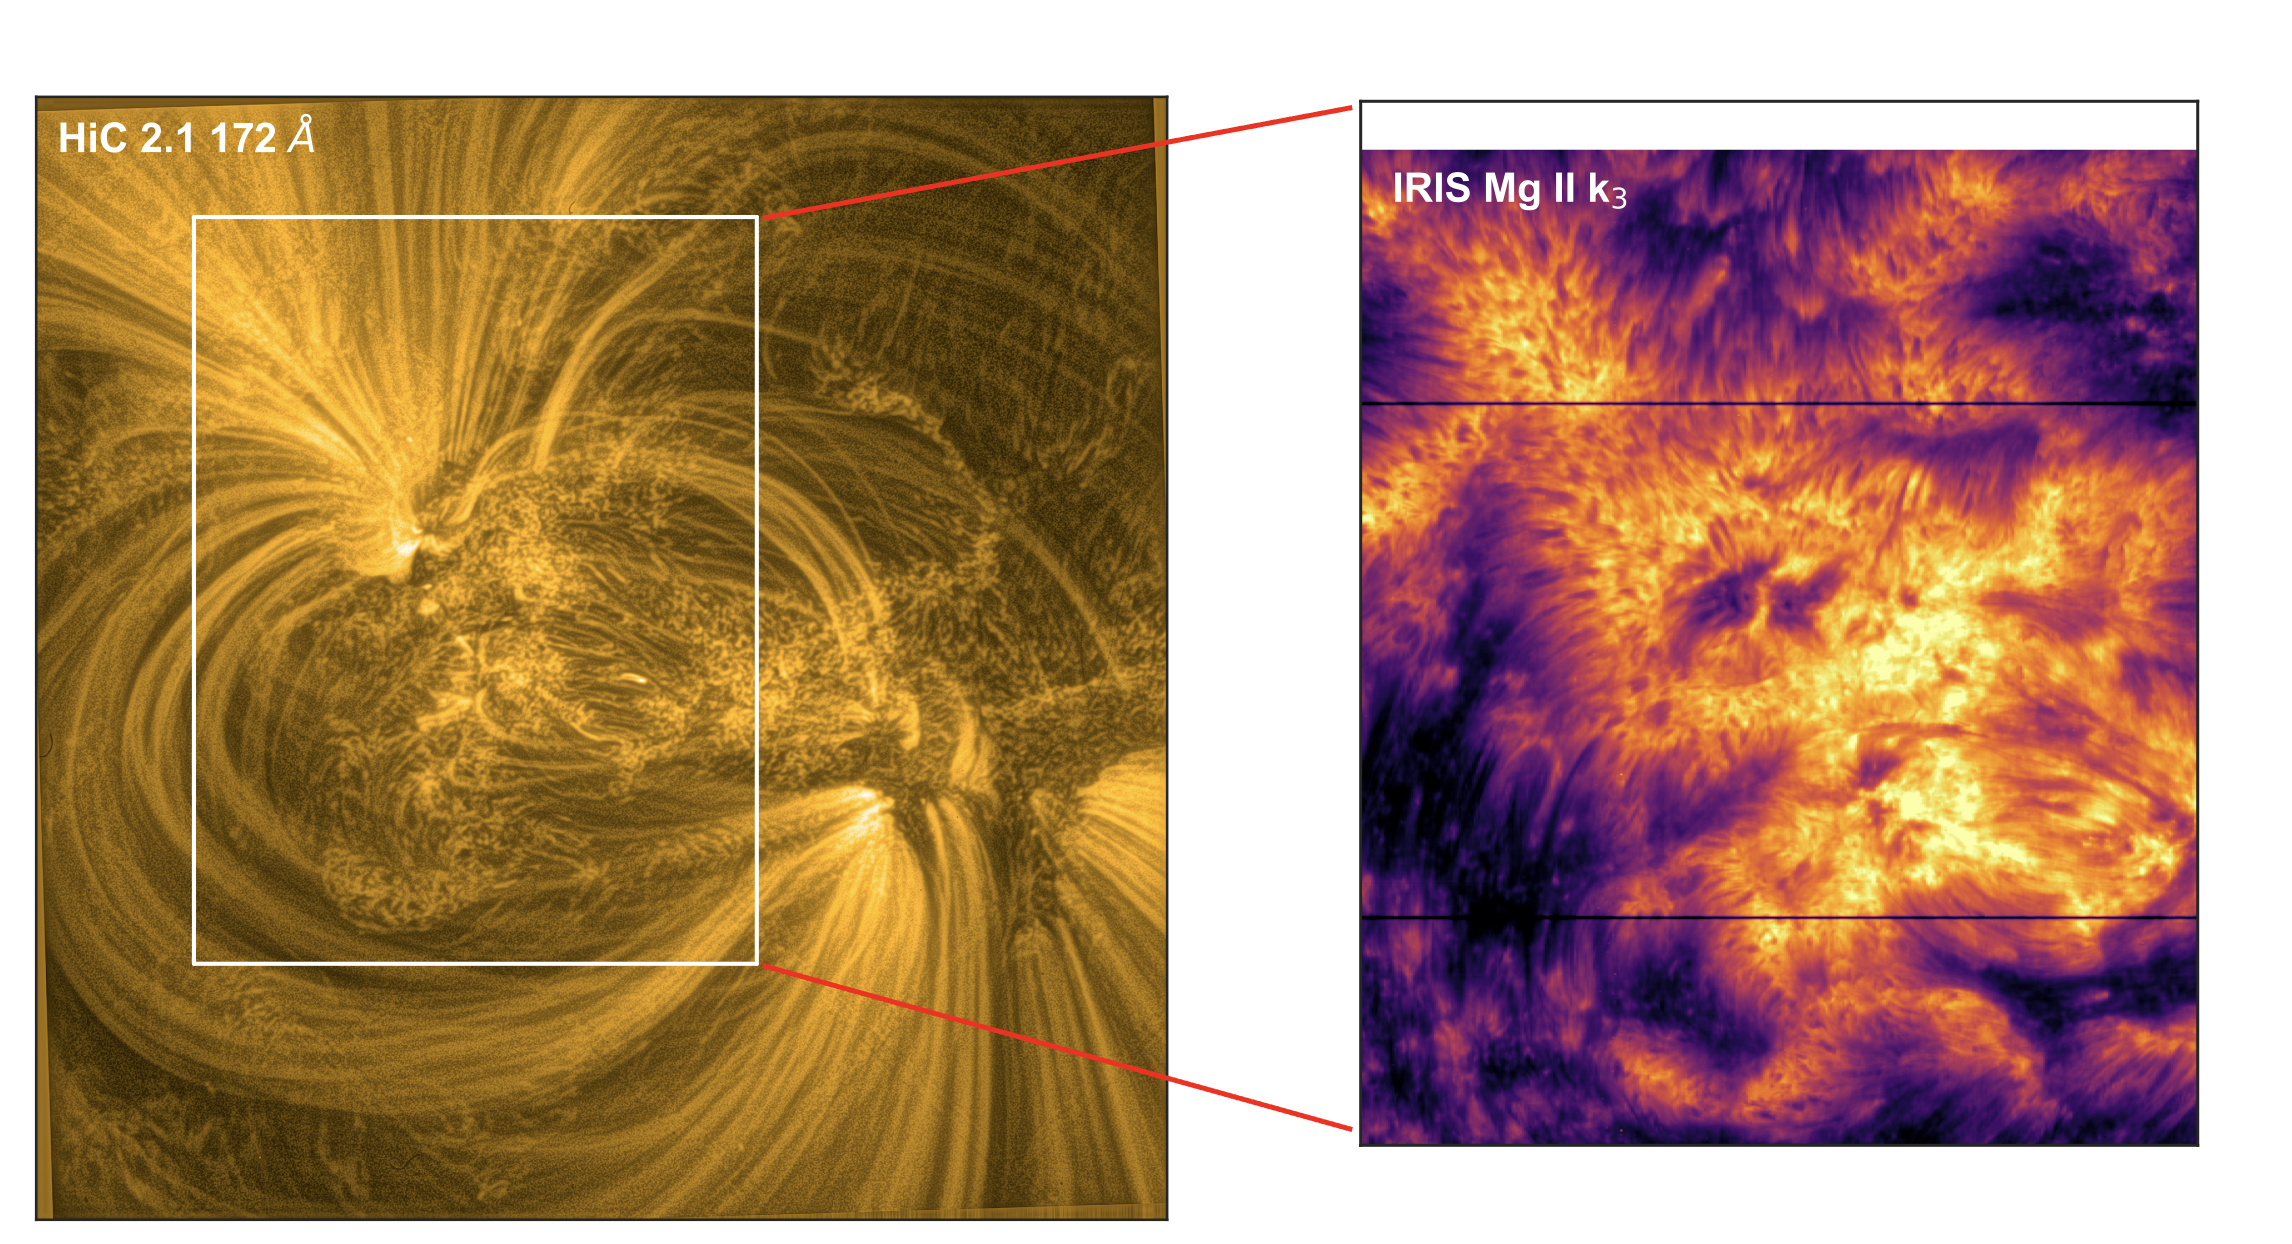 The left image shows thin swirls of bright golden material flowing off the Sun's surface. The outline of a white box is over a speckled area of the surface, in gray and bright gold. On the right, is that area in different wavelengths. The image is purple, black, red, orange, and right yellow. In the highlighted area, the speckles are a very bright yellow with some cooler purple areas.